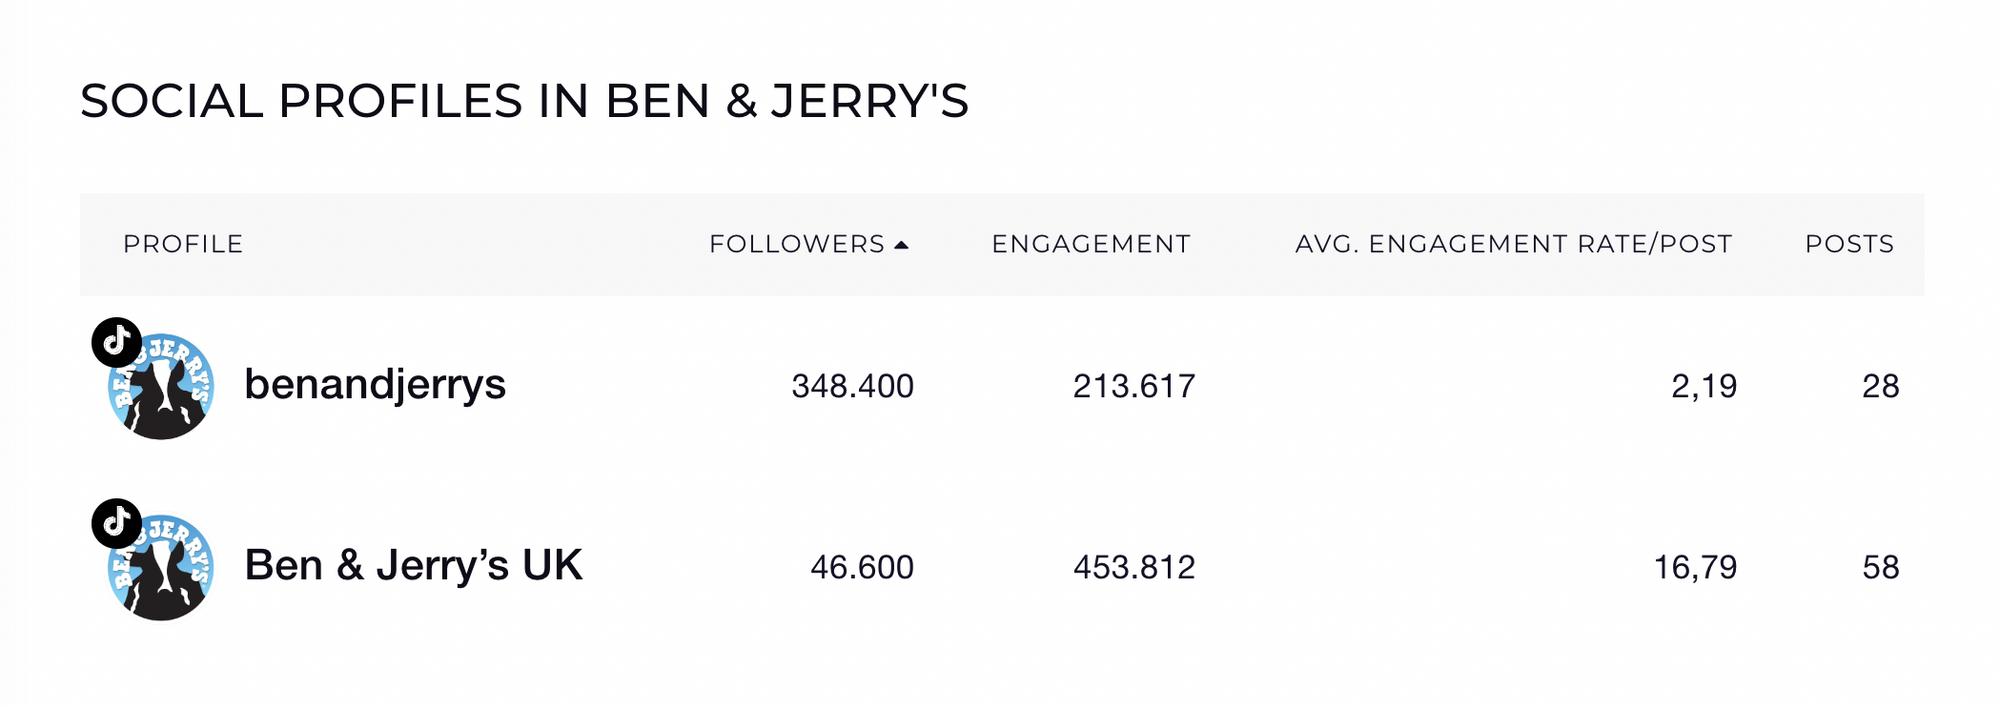 Here are some stats showing performance benchmarks for different Ben and Jerry's TikTok accounts.